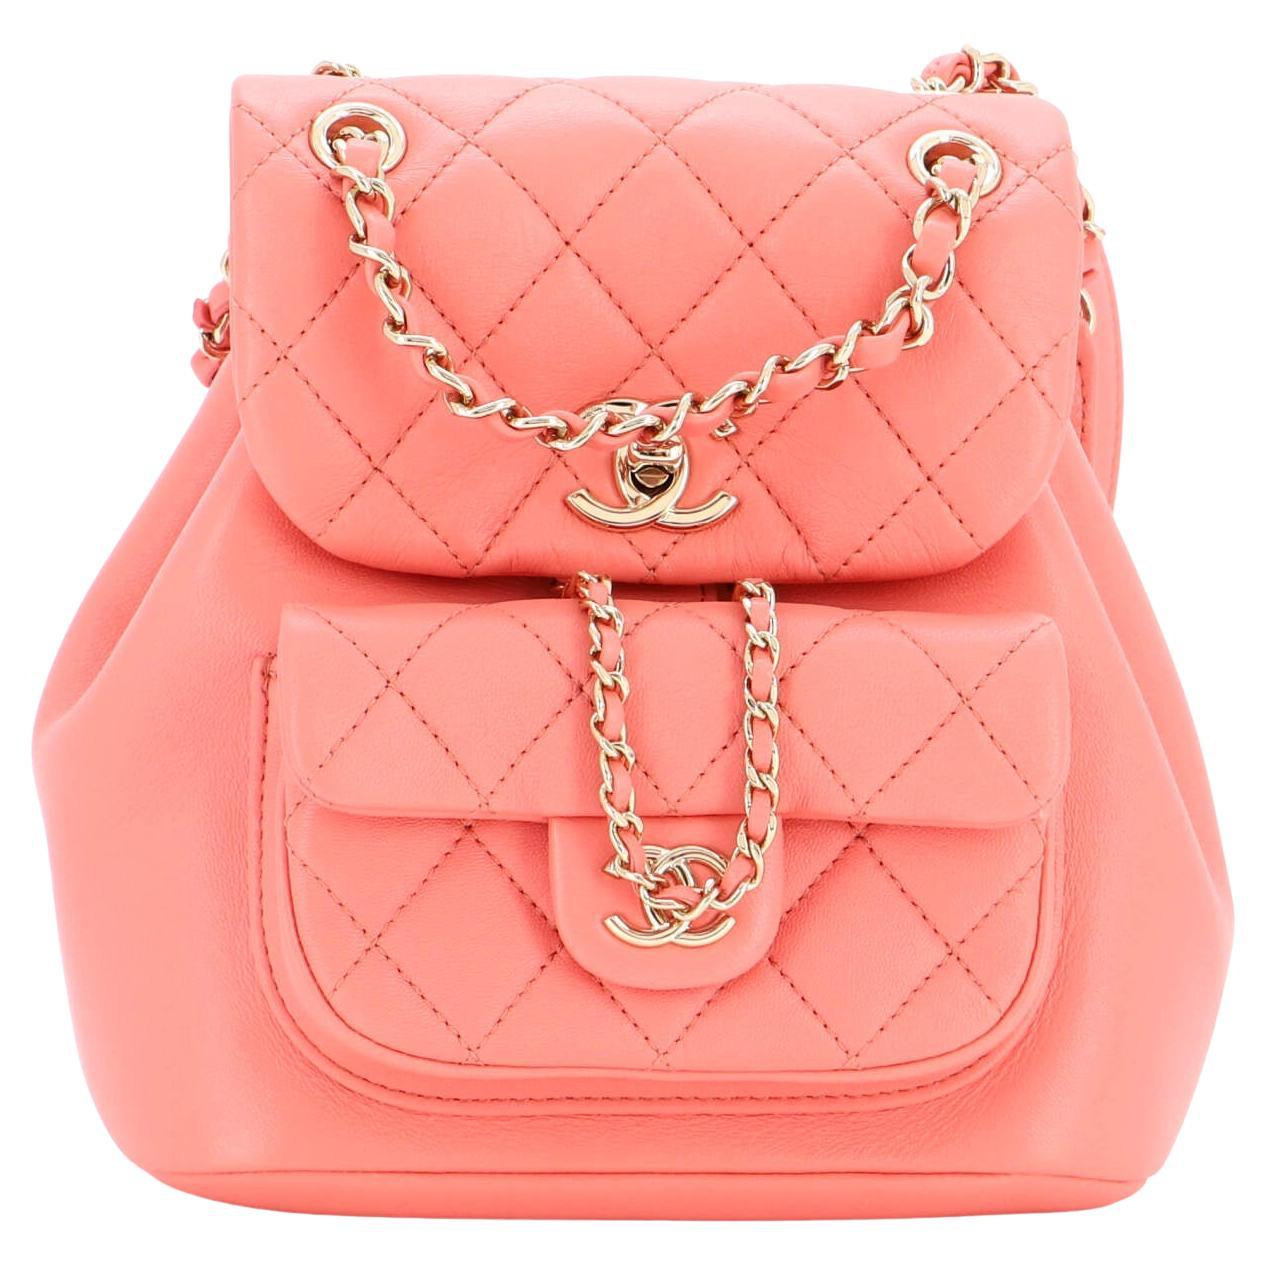 Chanel Pink Backpack - 9 For Sale on 1stDibs  pink bookbag, pink backpack  large, pink chanel mini backpack